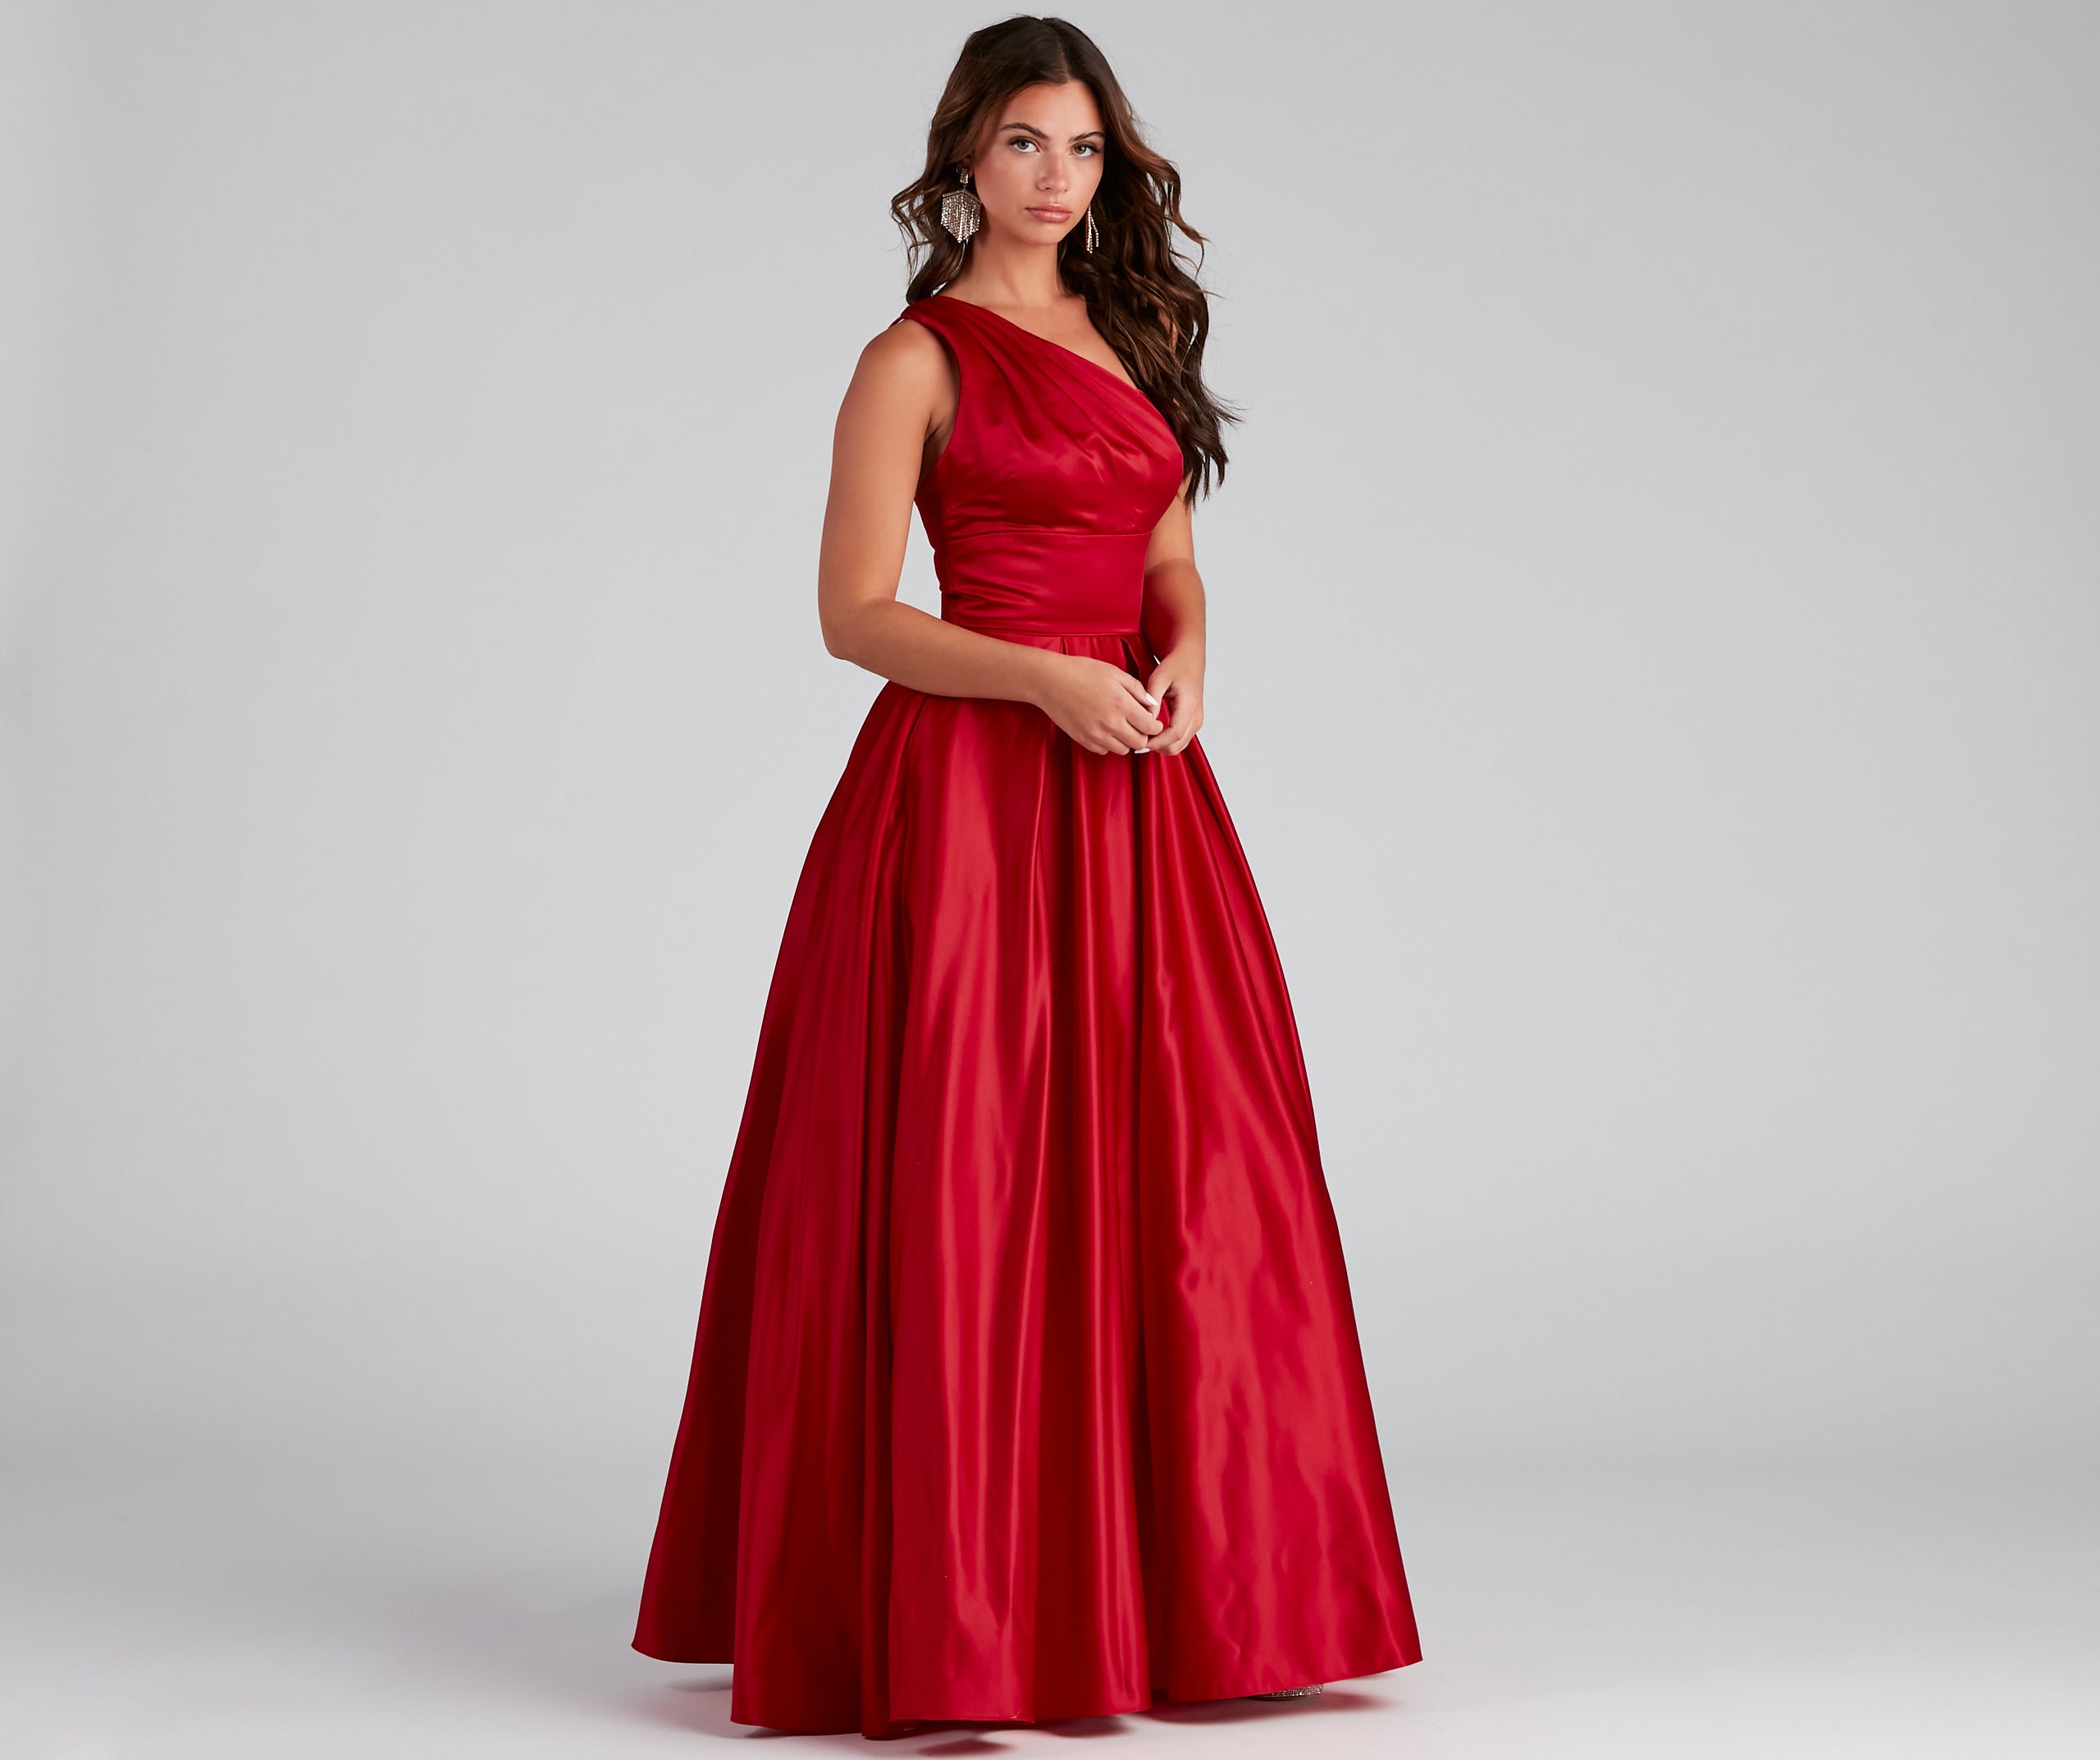 Naomi One-Shoulder Satin Ball Gown